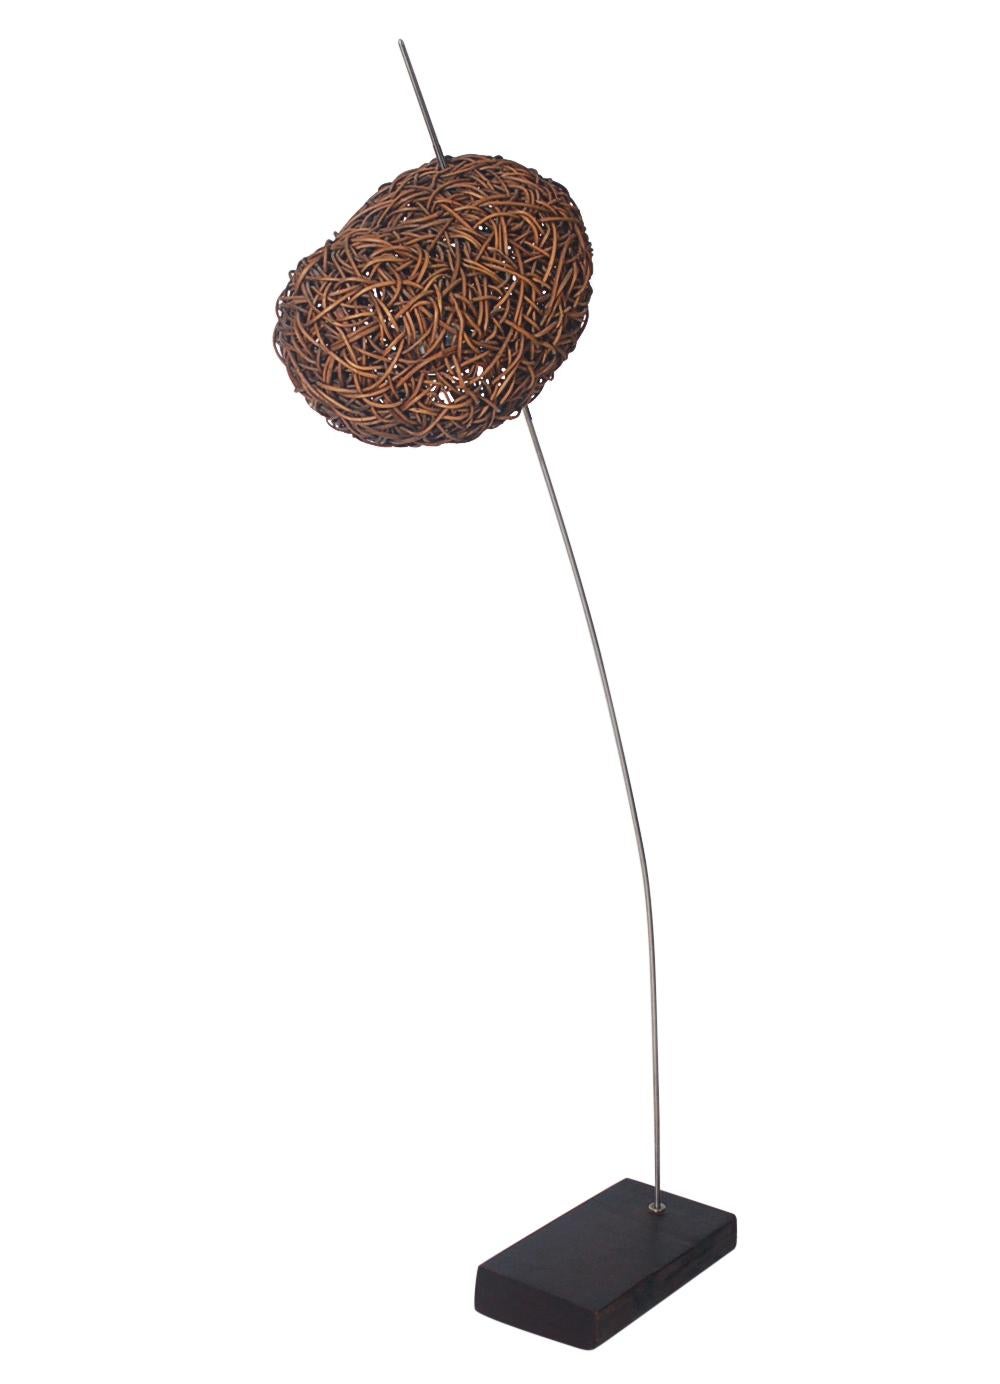 Thai Postmodern Organic Rattan Floor Lamp by Udom Udomsrianan and Planet, 2001 For Sale